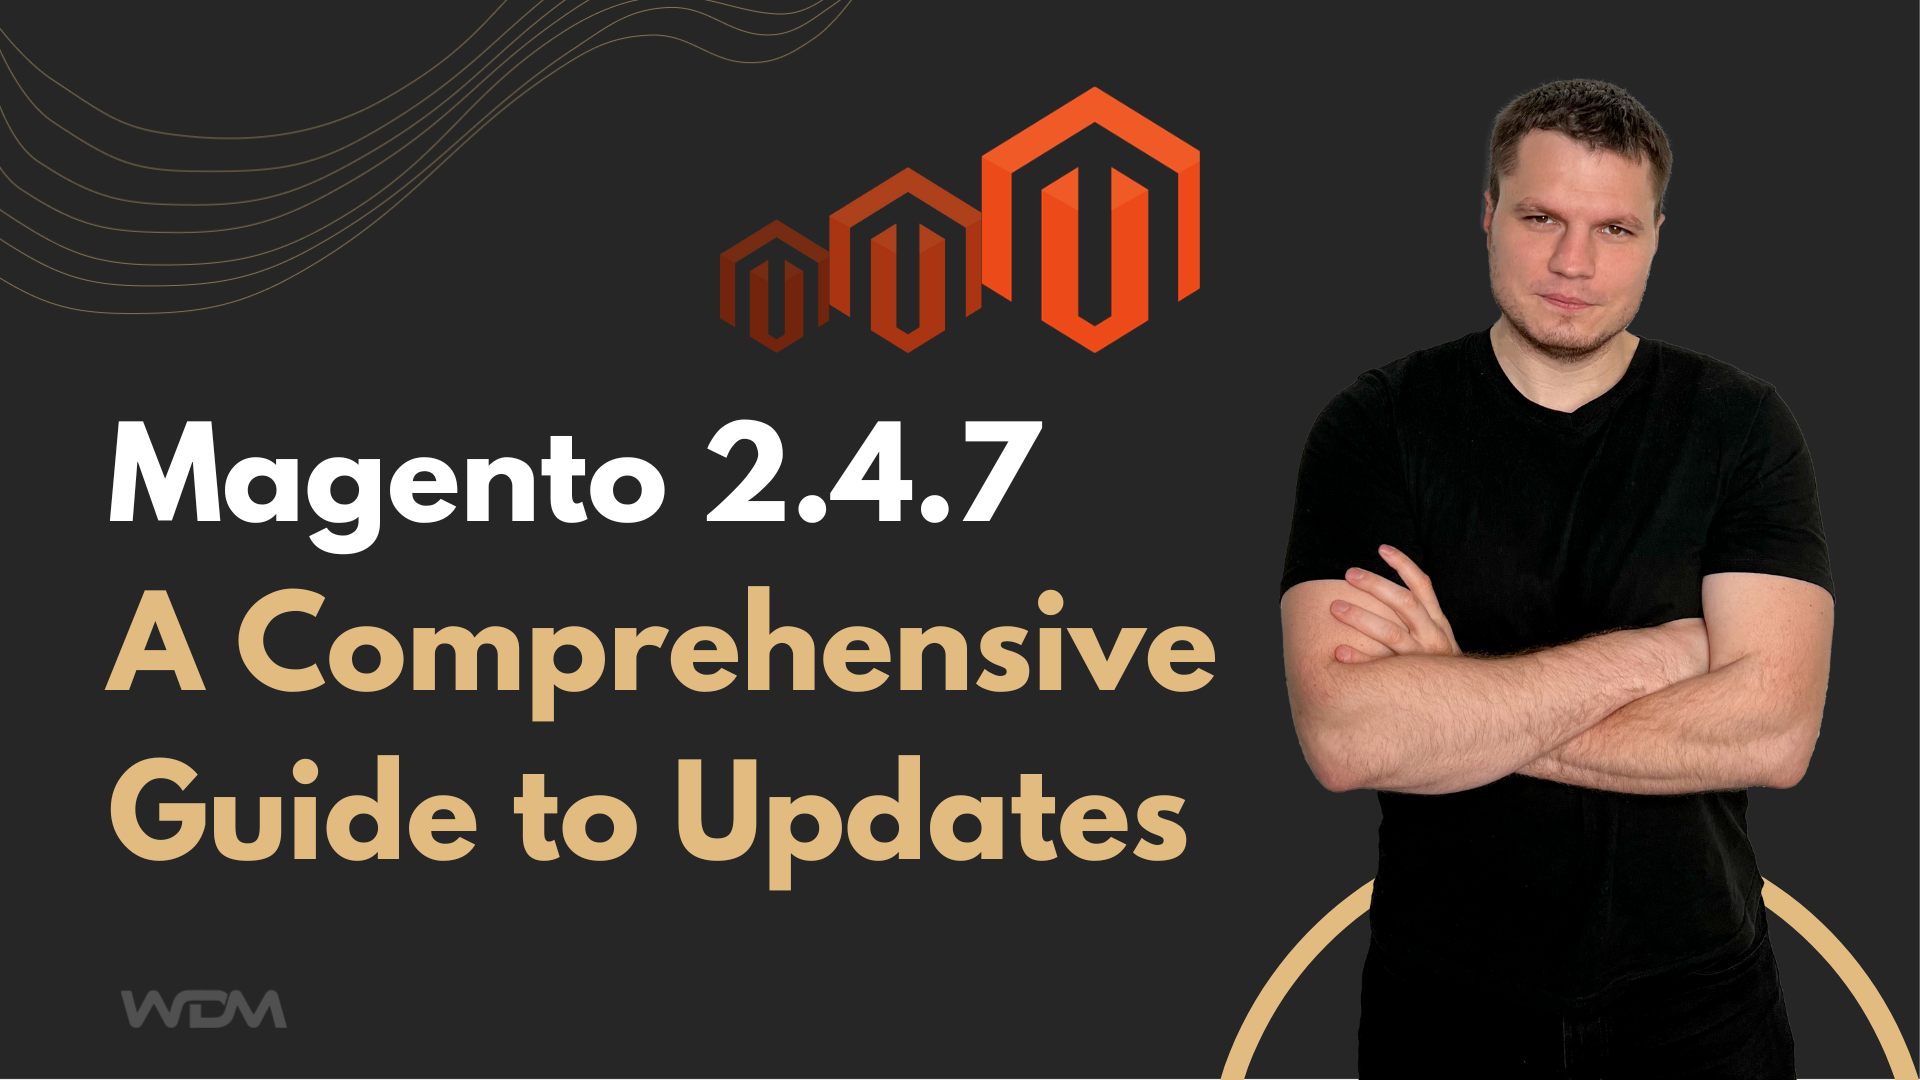 Magento 2.4.7 A Comprehensive Guide to Updates